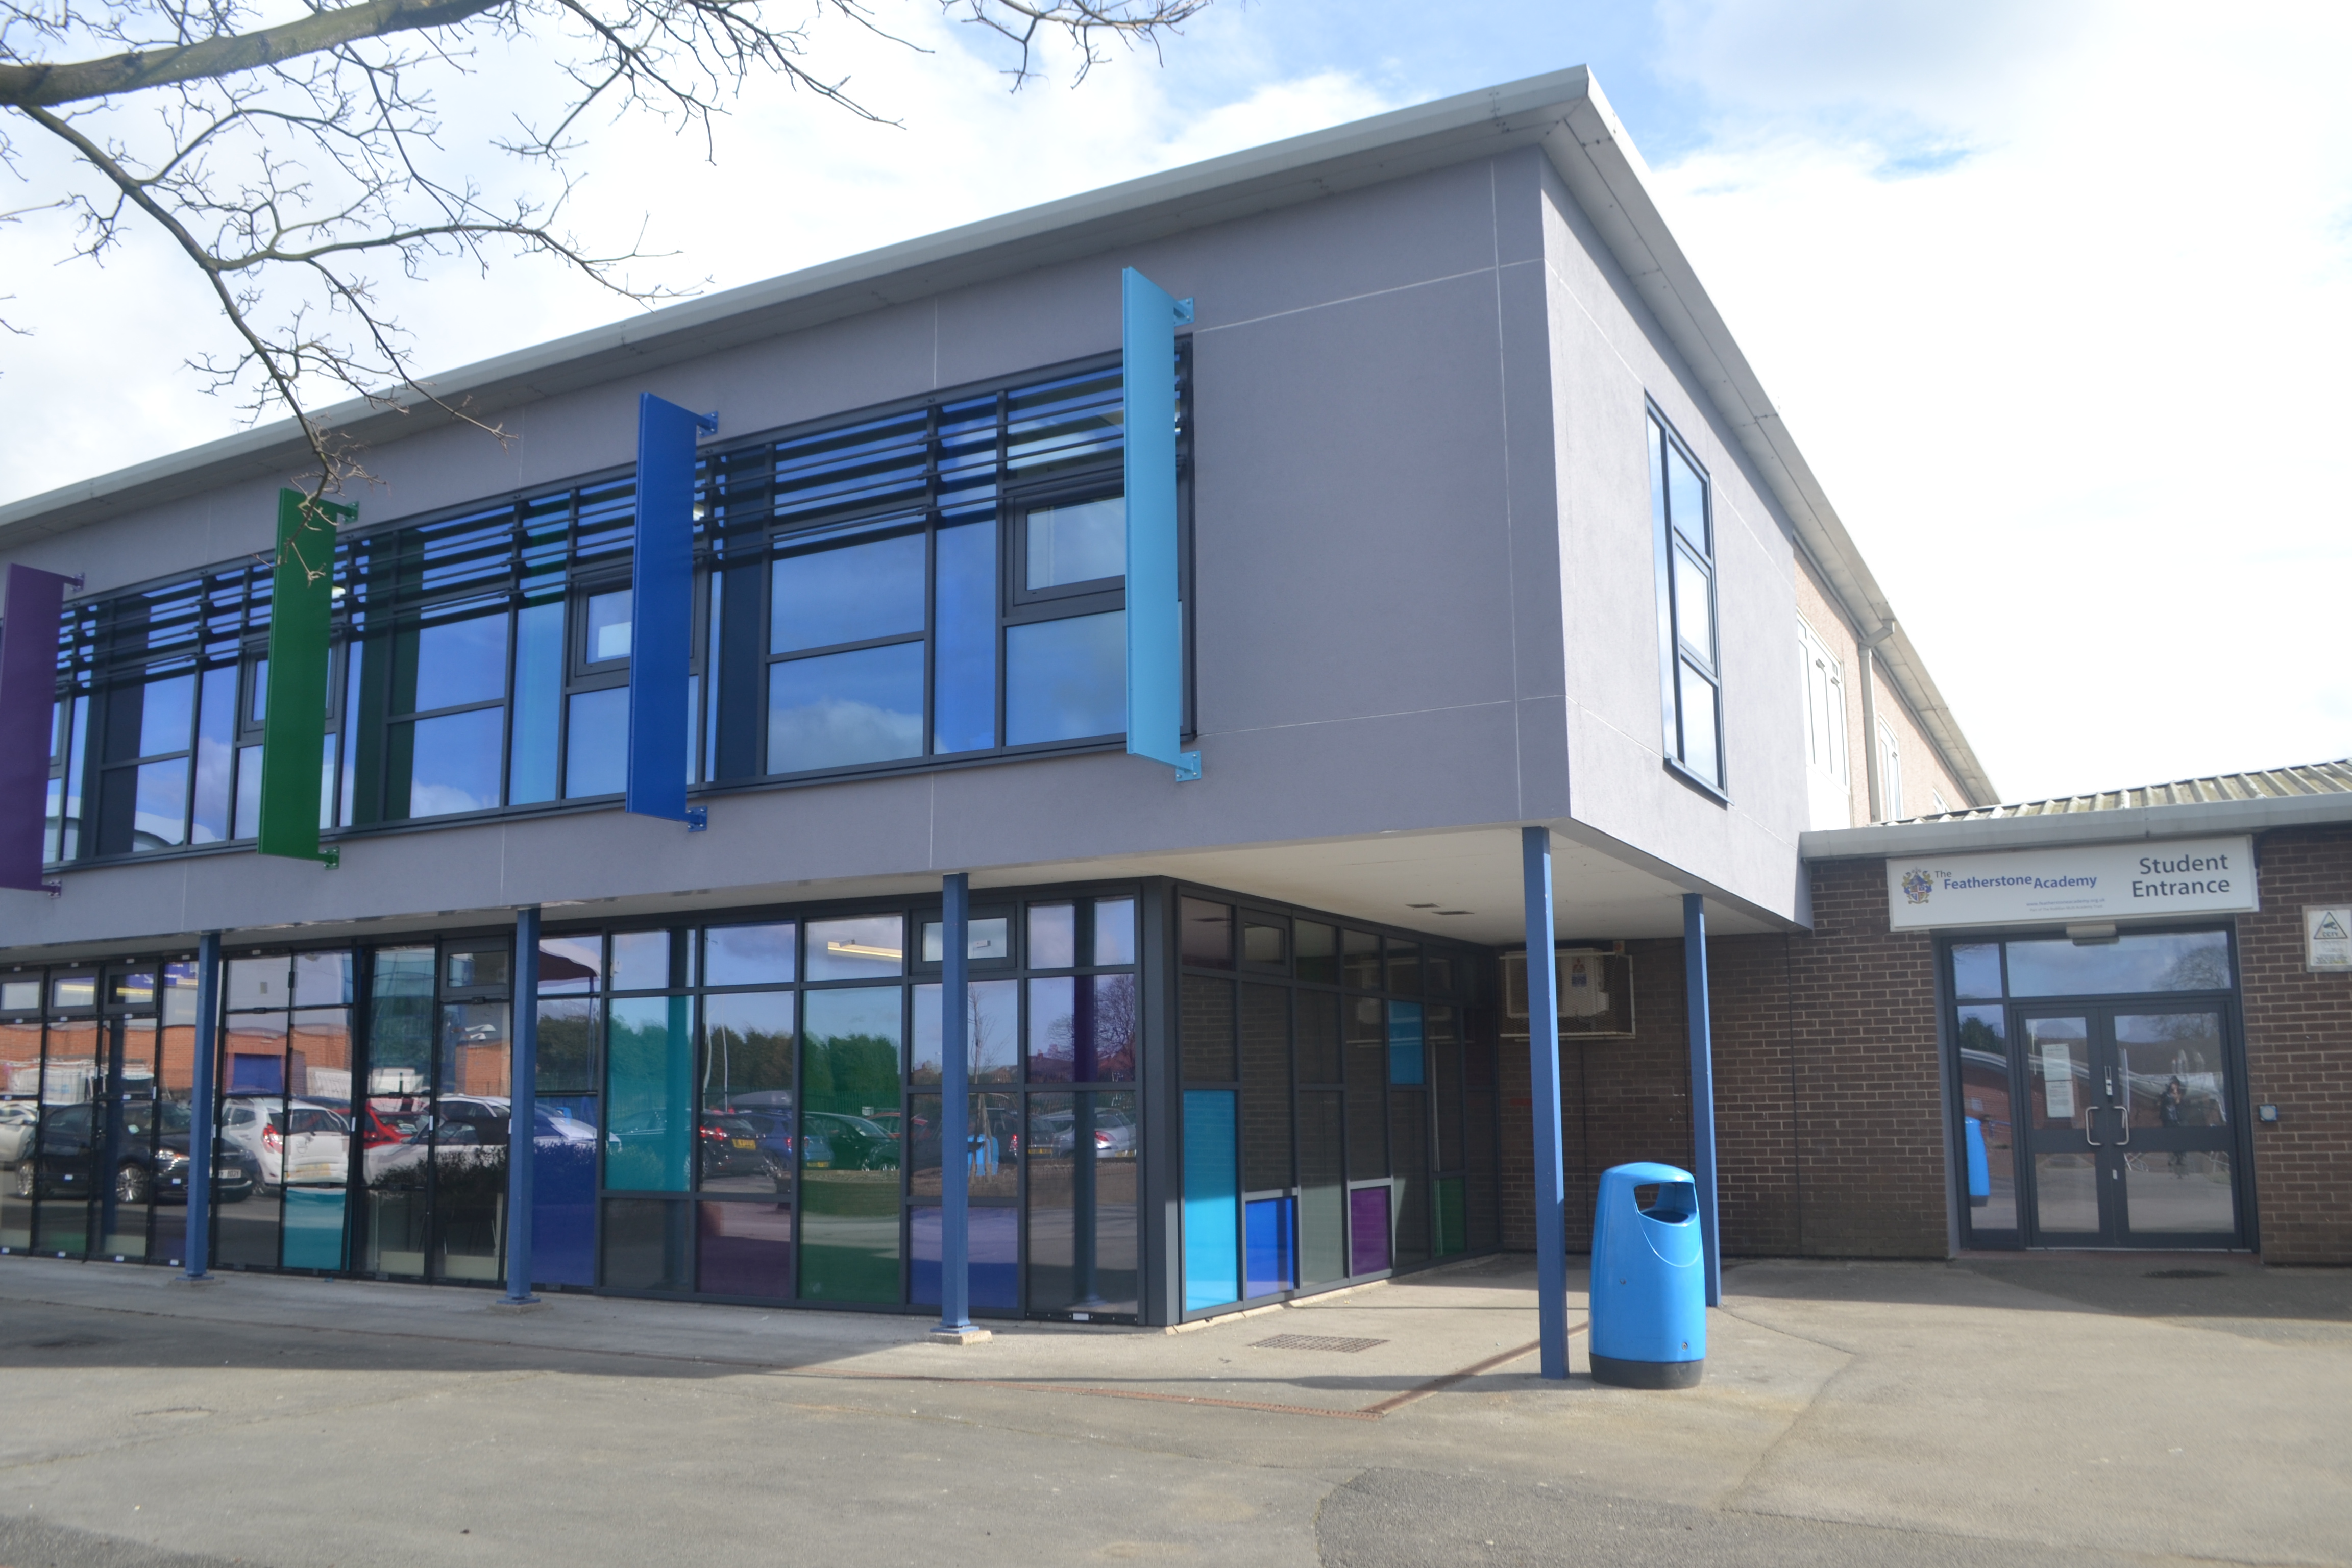 The Featherstone Academy